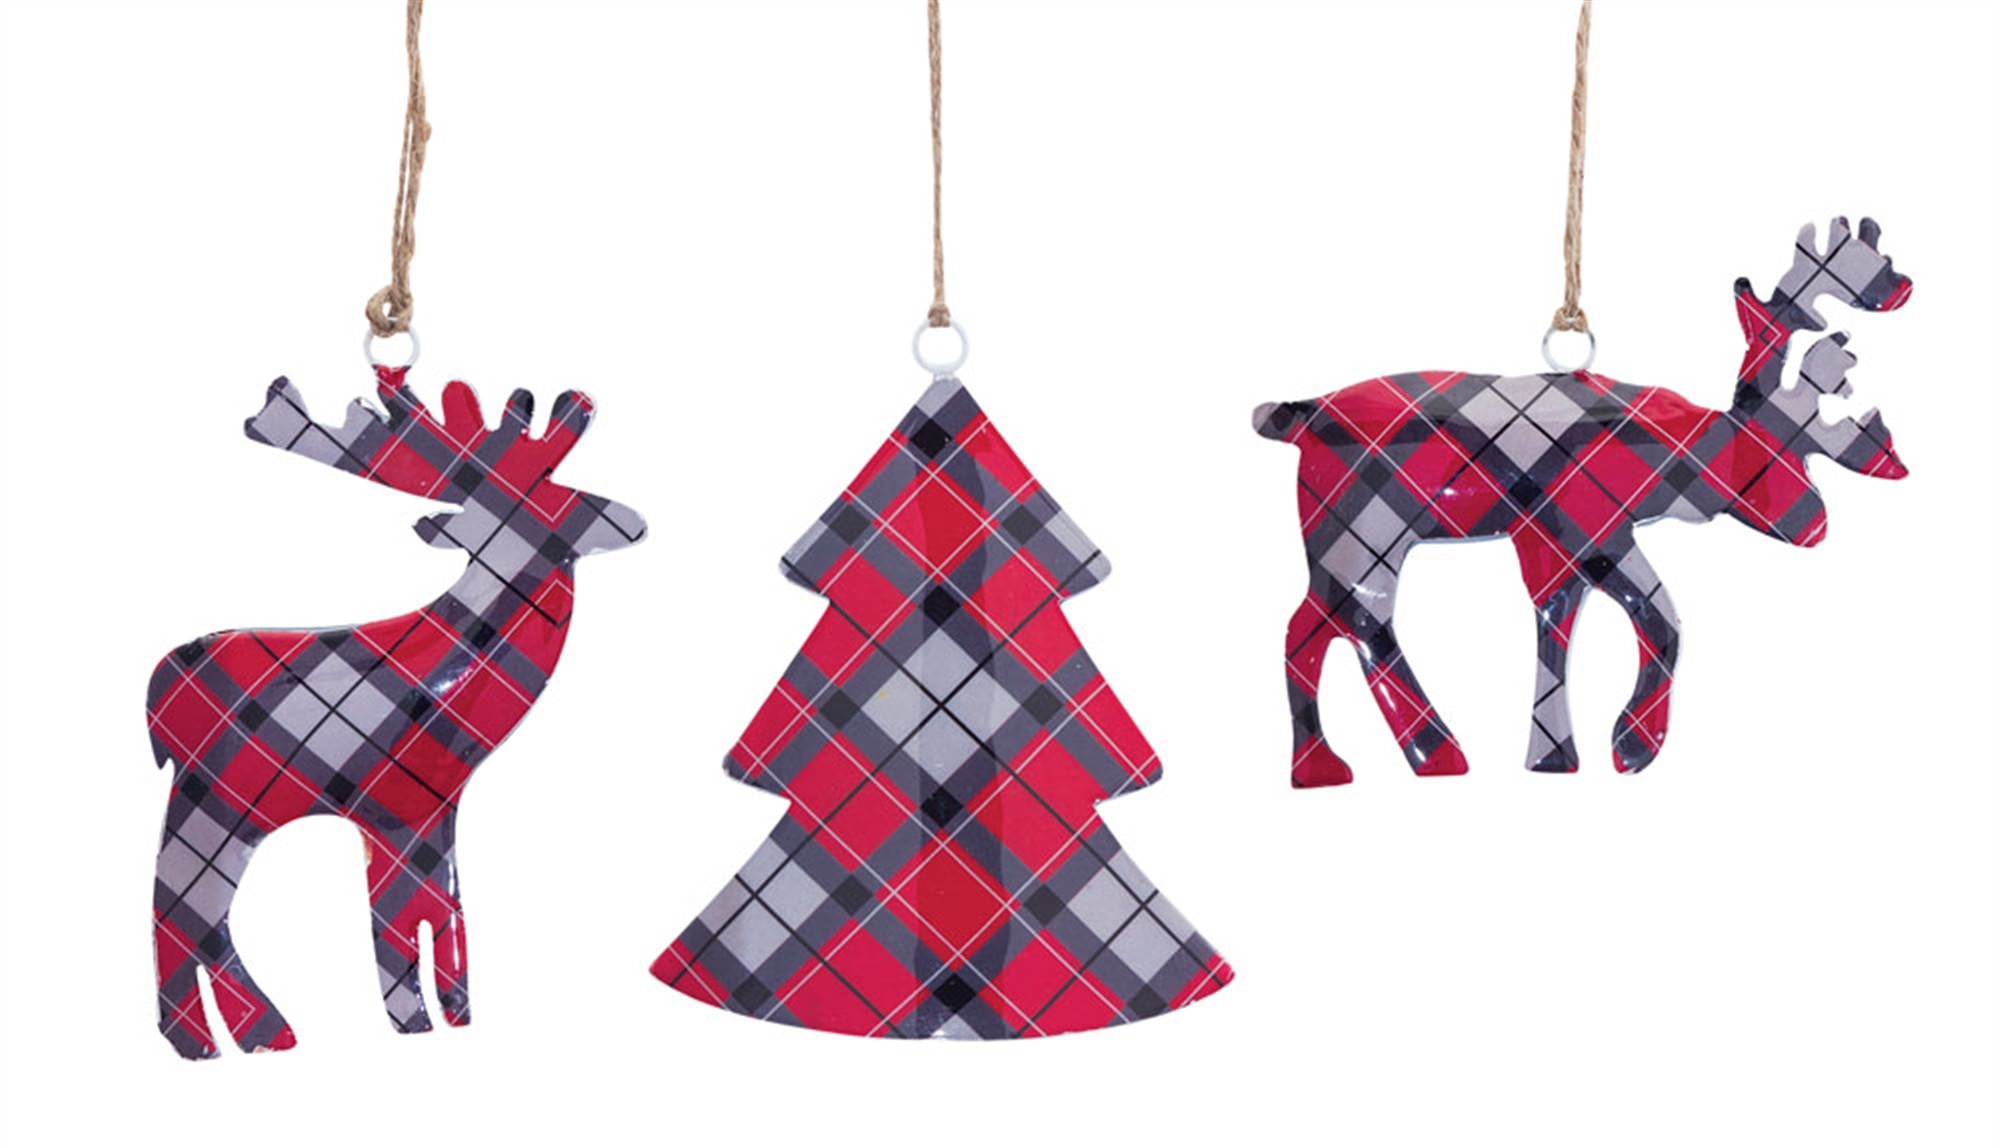 Deer and Tree Plaid Ornament (Set of 6) 4.75"H, 5.75"H, 6"H Iron